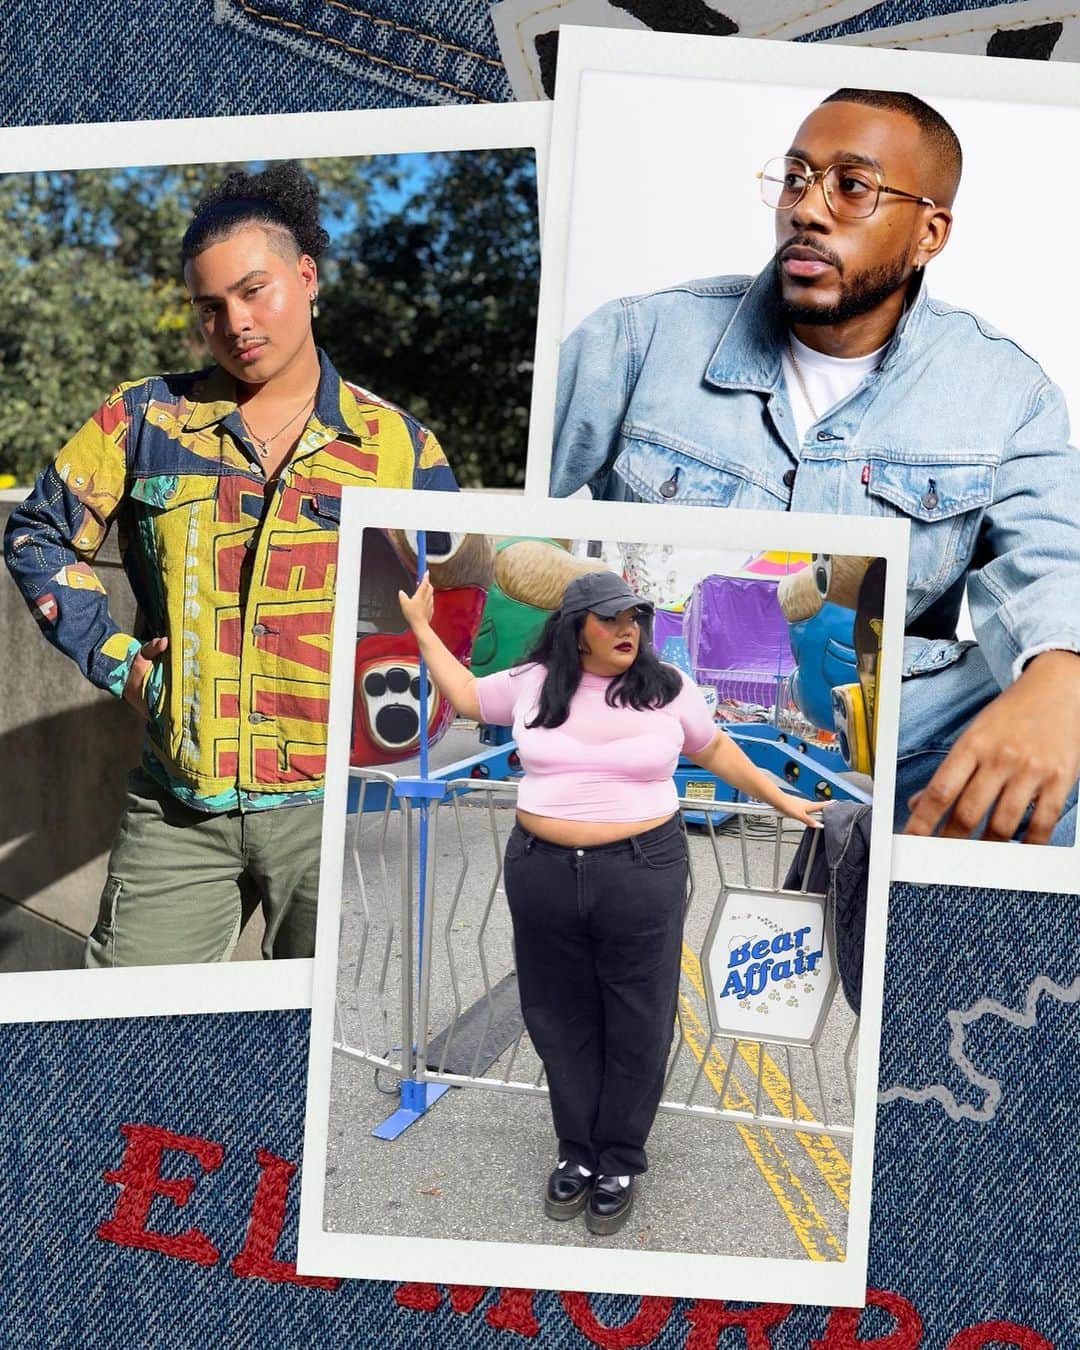 Levi’sのインスタグラム：「This Hispanic Heritage Month, we're highlighting three creatives who are preserving their rich family legacies and cultures through art. Follow along as @gabrielaxruiz, @jveloz, and @alejejacob honor the relatives who’ve had the greatest impact on their lives by designing their very own one-of-a-kind 501® jeans alongside our Levi's tailors.  Read more at the link in bio and stay tuned to hear how each of their designs unfold.」